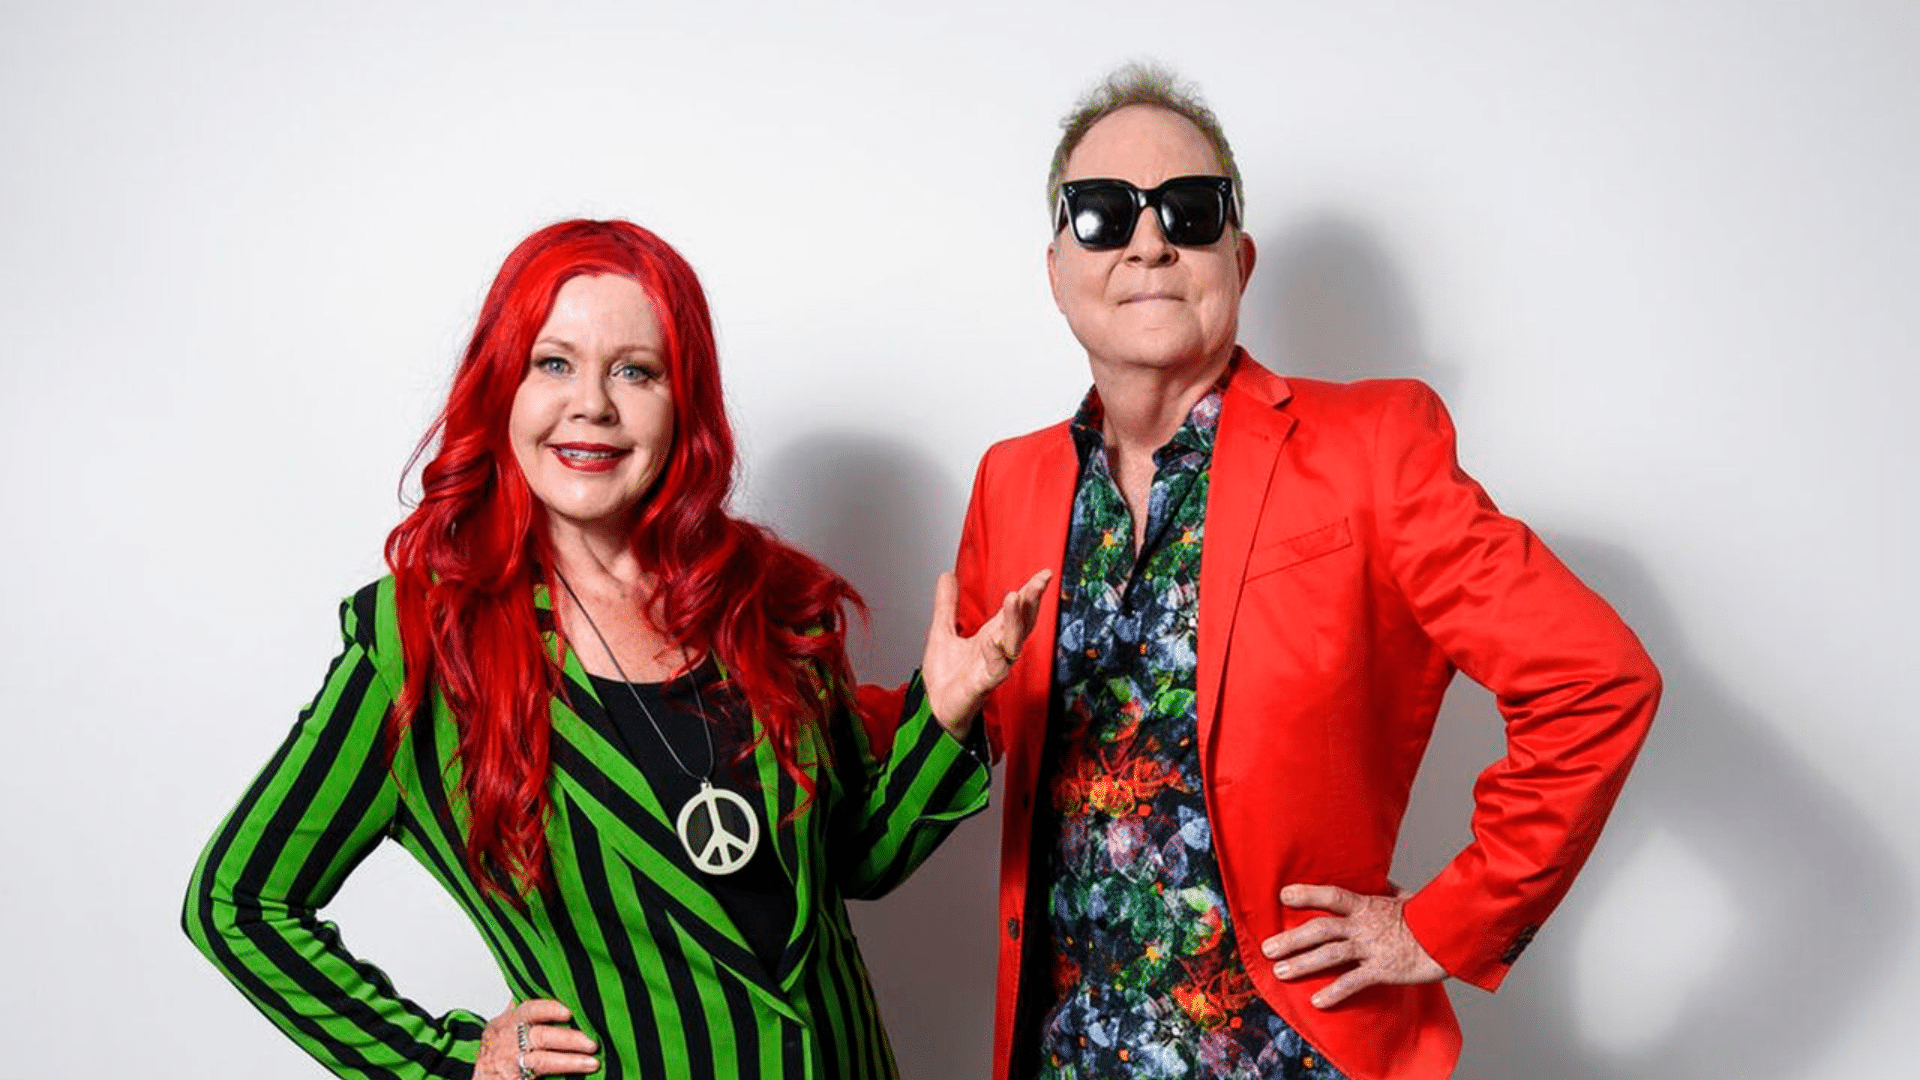 book The B-52s band